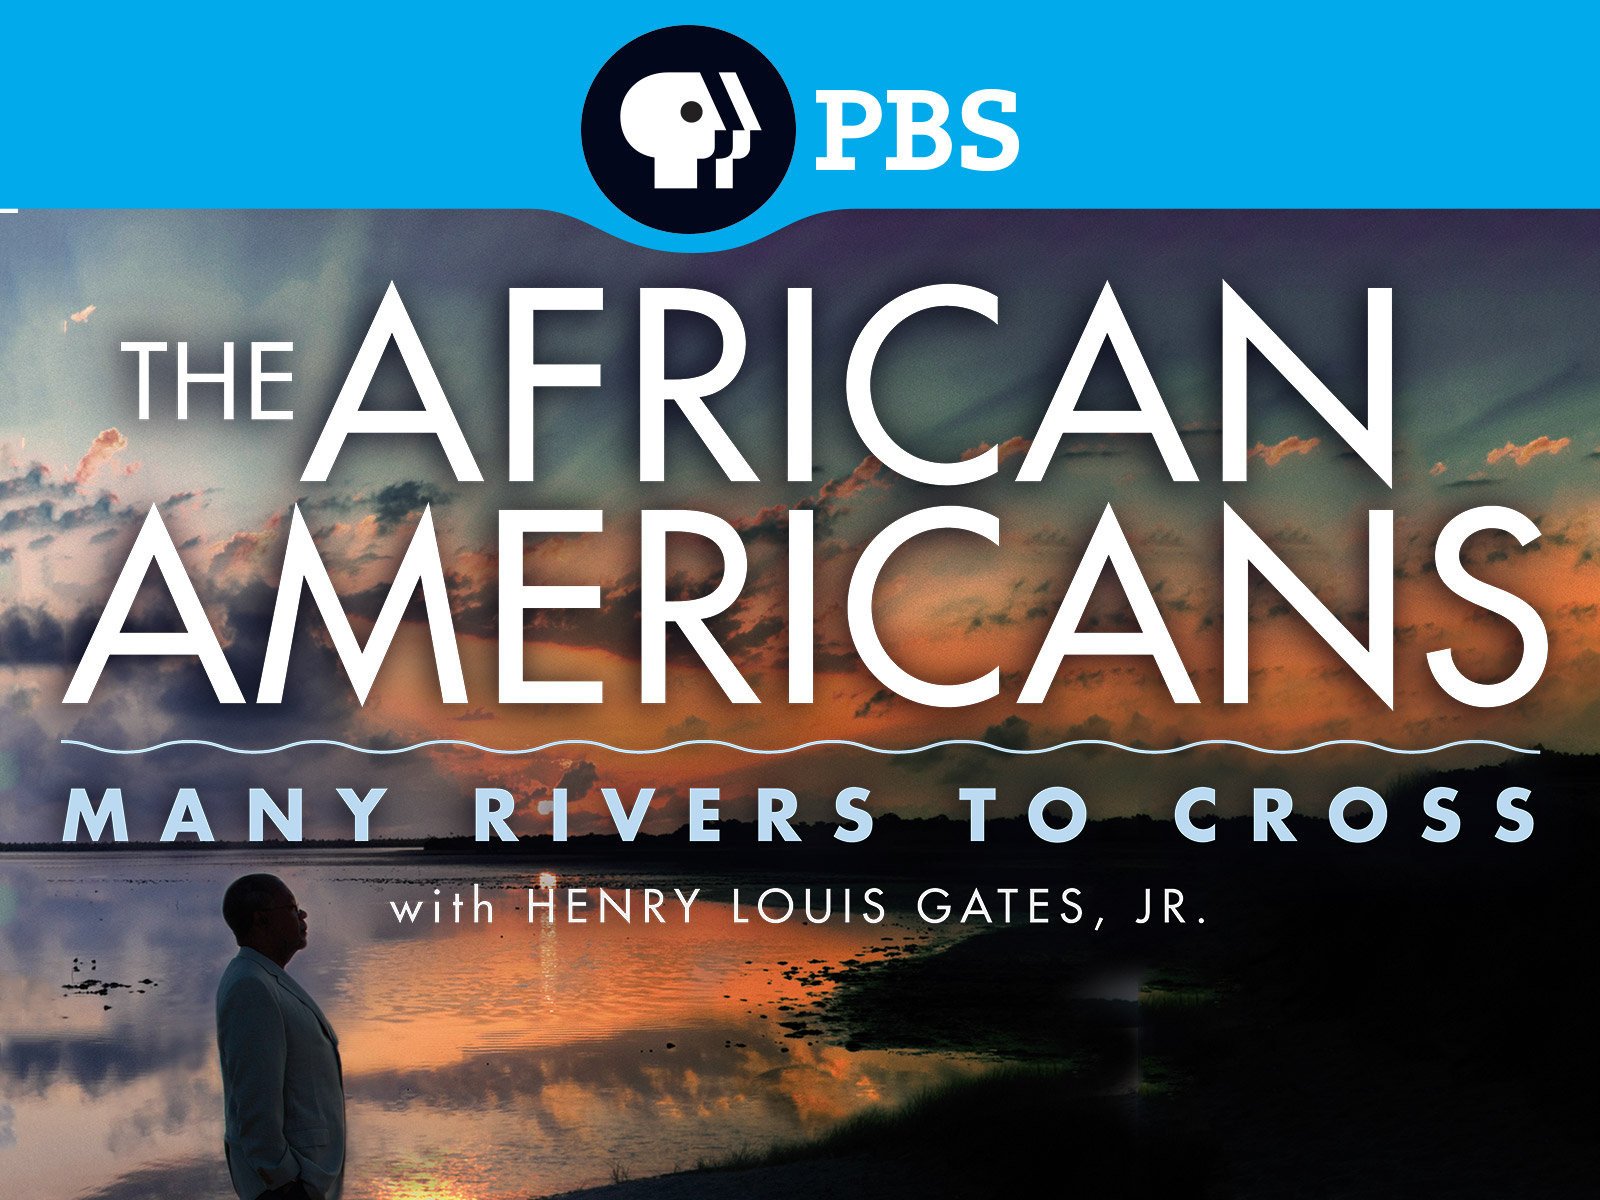 black history movies-the african americas many rivers to cross